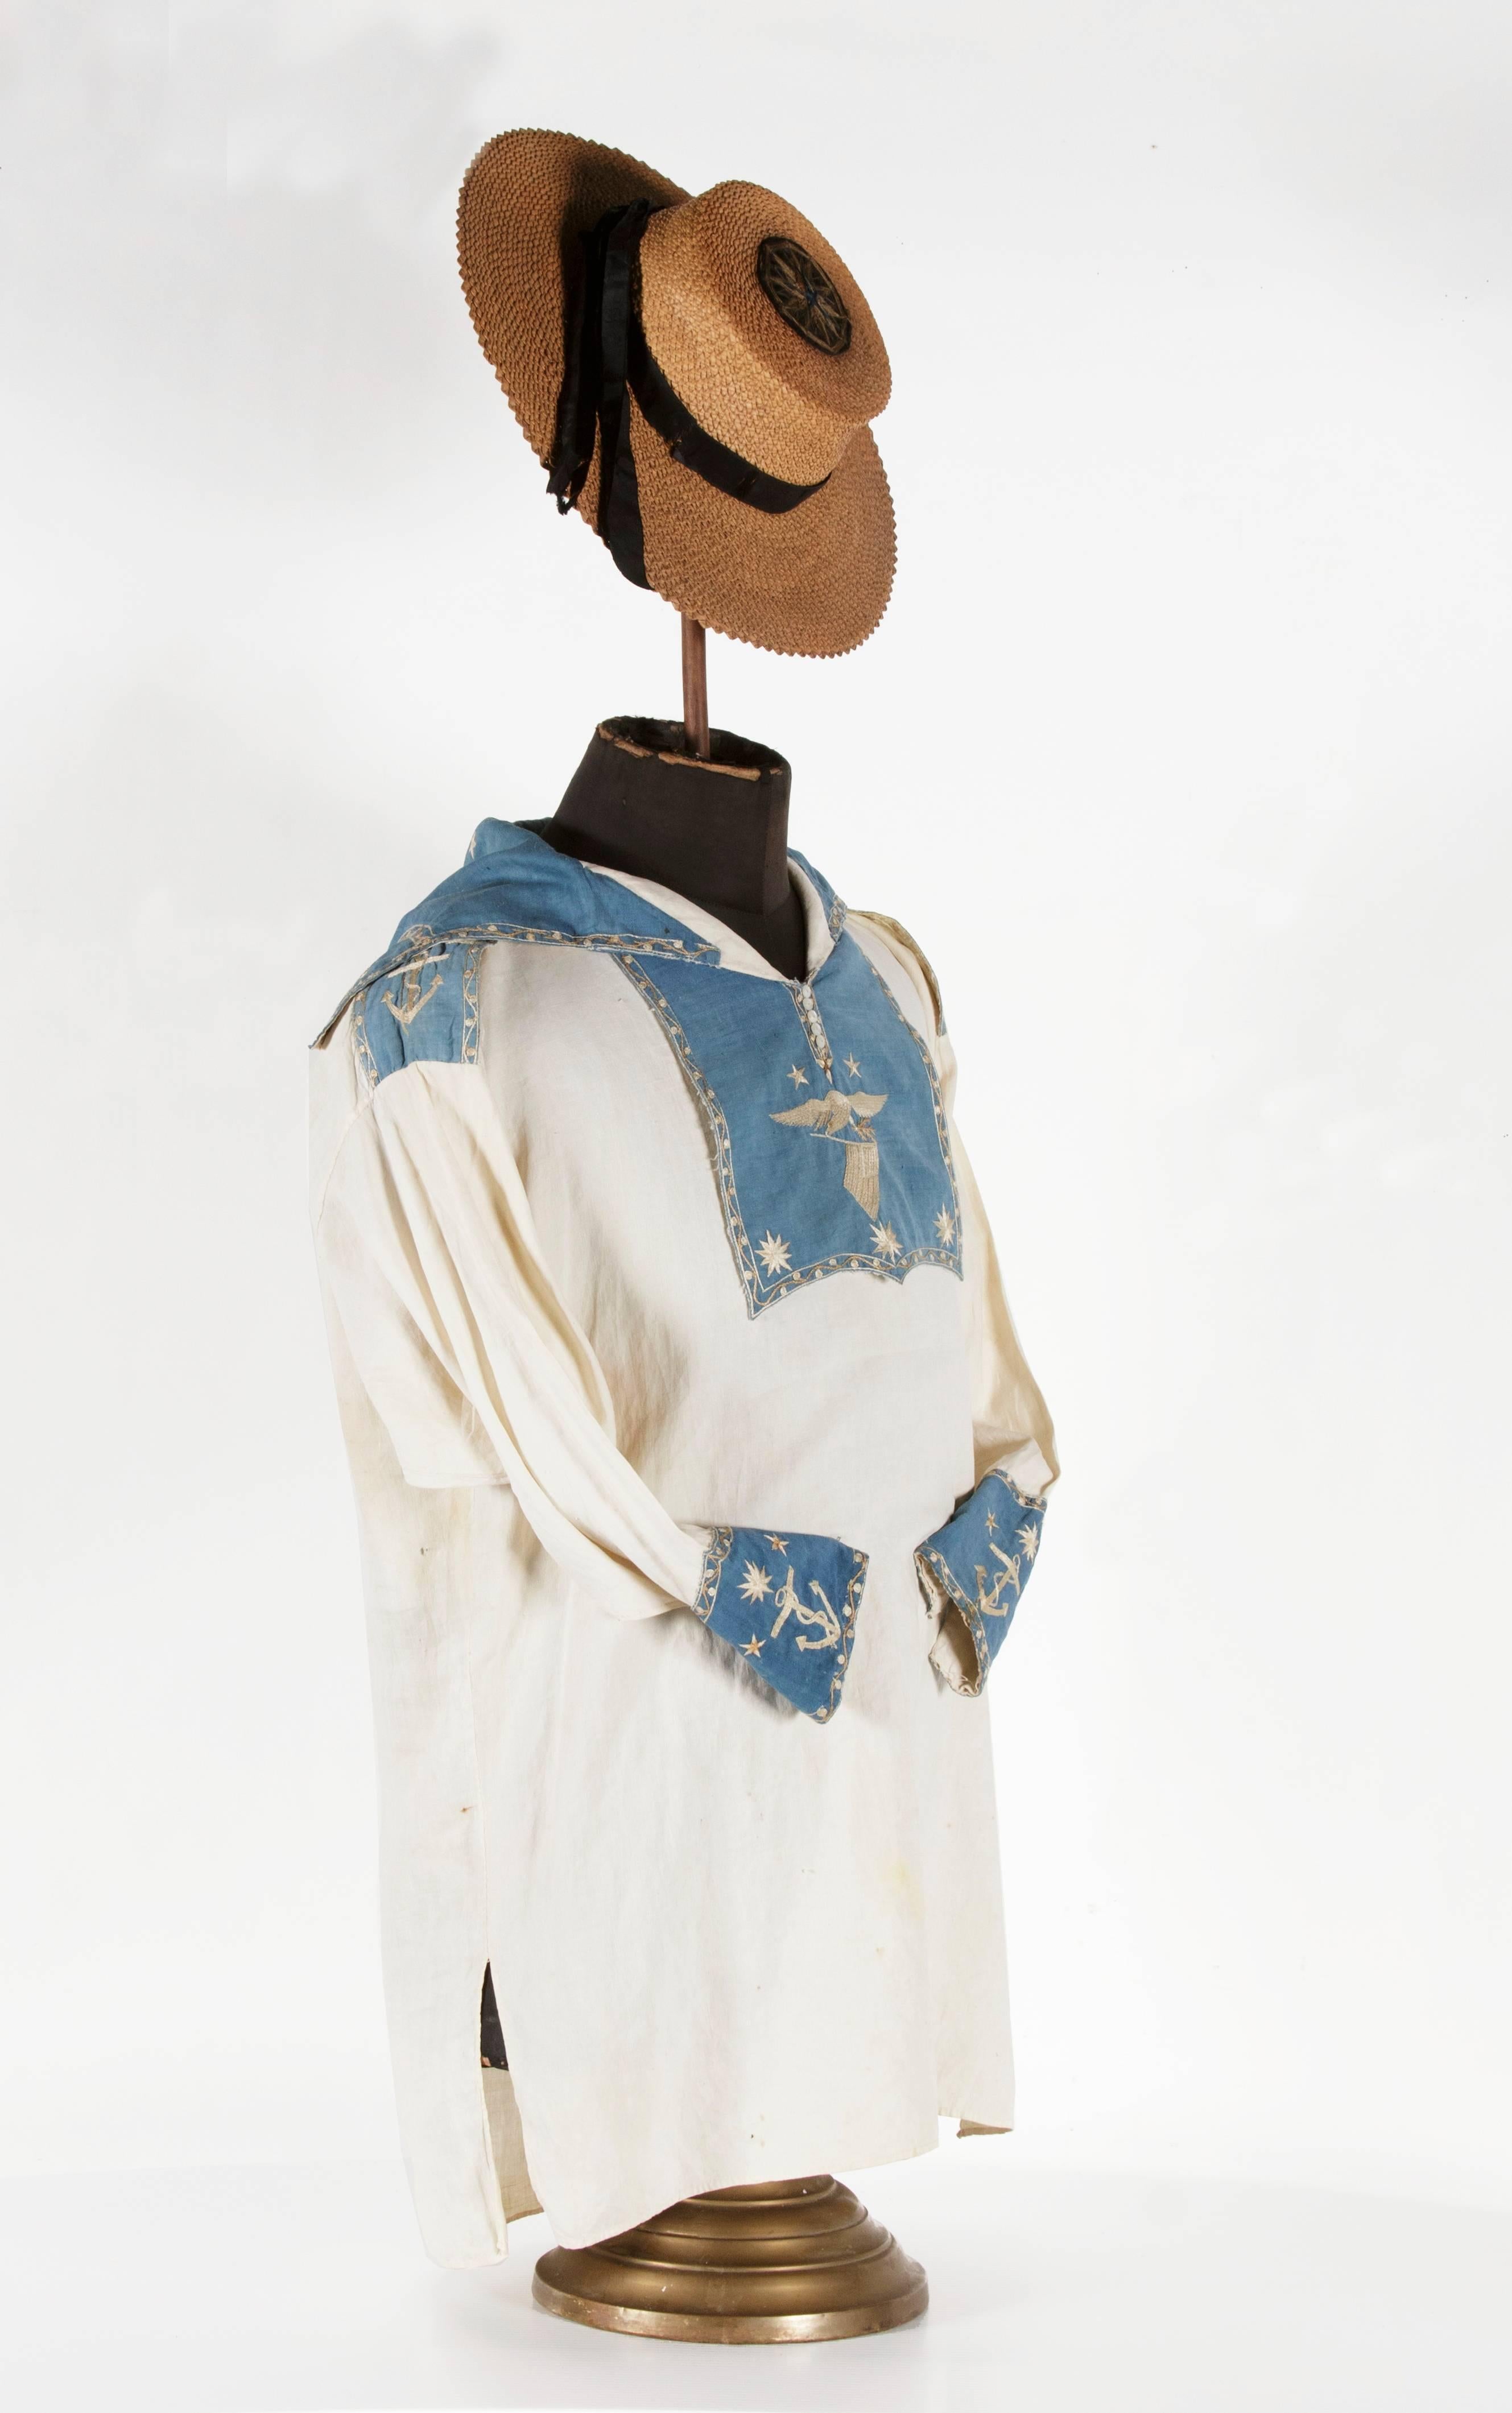 CIVIL WAR PERIOD OR PRIOR NAVYMAN’S FROCK AND JACK TAR HAT WITH ELABORATE PATRIOTIC AND NAUTICAL DECORATION, LIKELY THE BEST EXAMPLES OF EACH TO HAVE SURVIVED IN PRIVATE HANDS:

Sailor’s frock and Jack Tar style sennit, each of the Civil War period